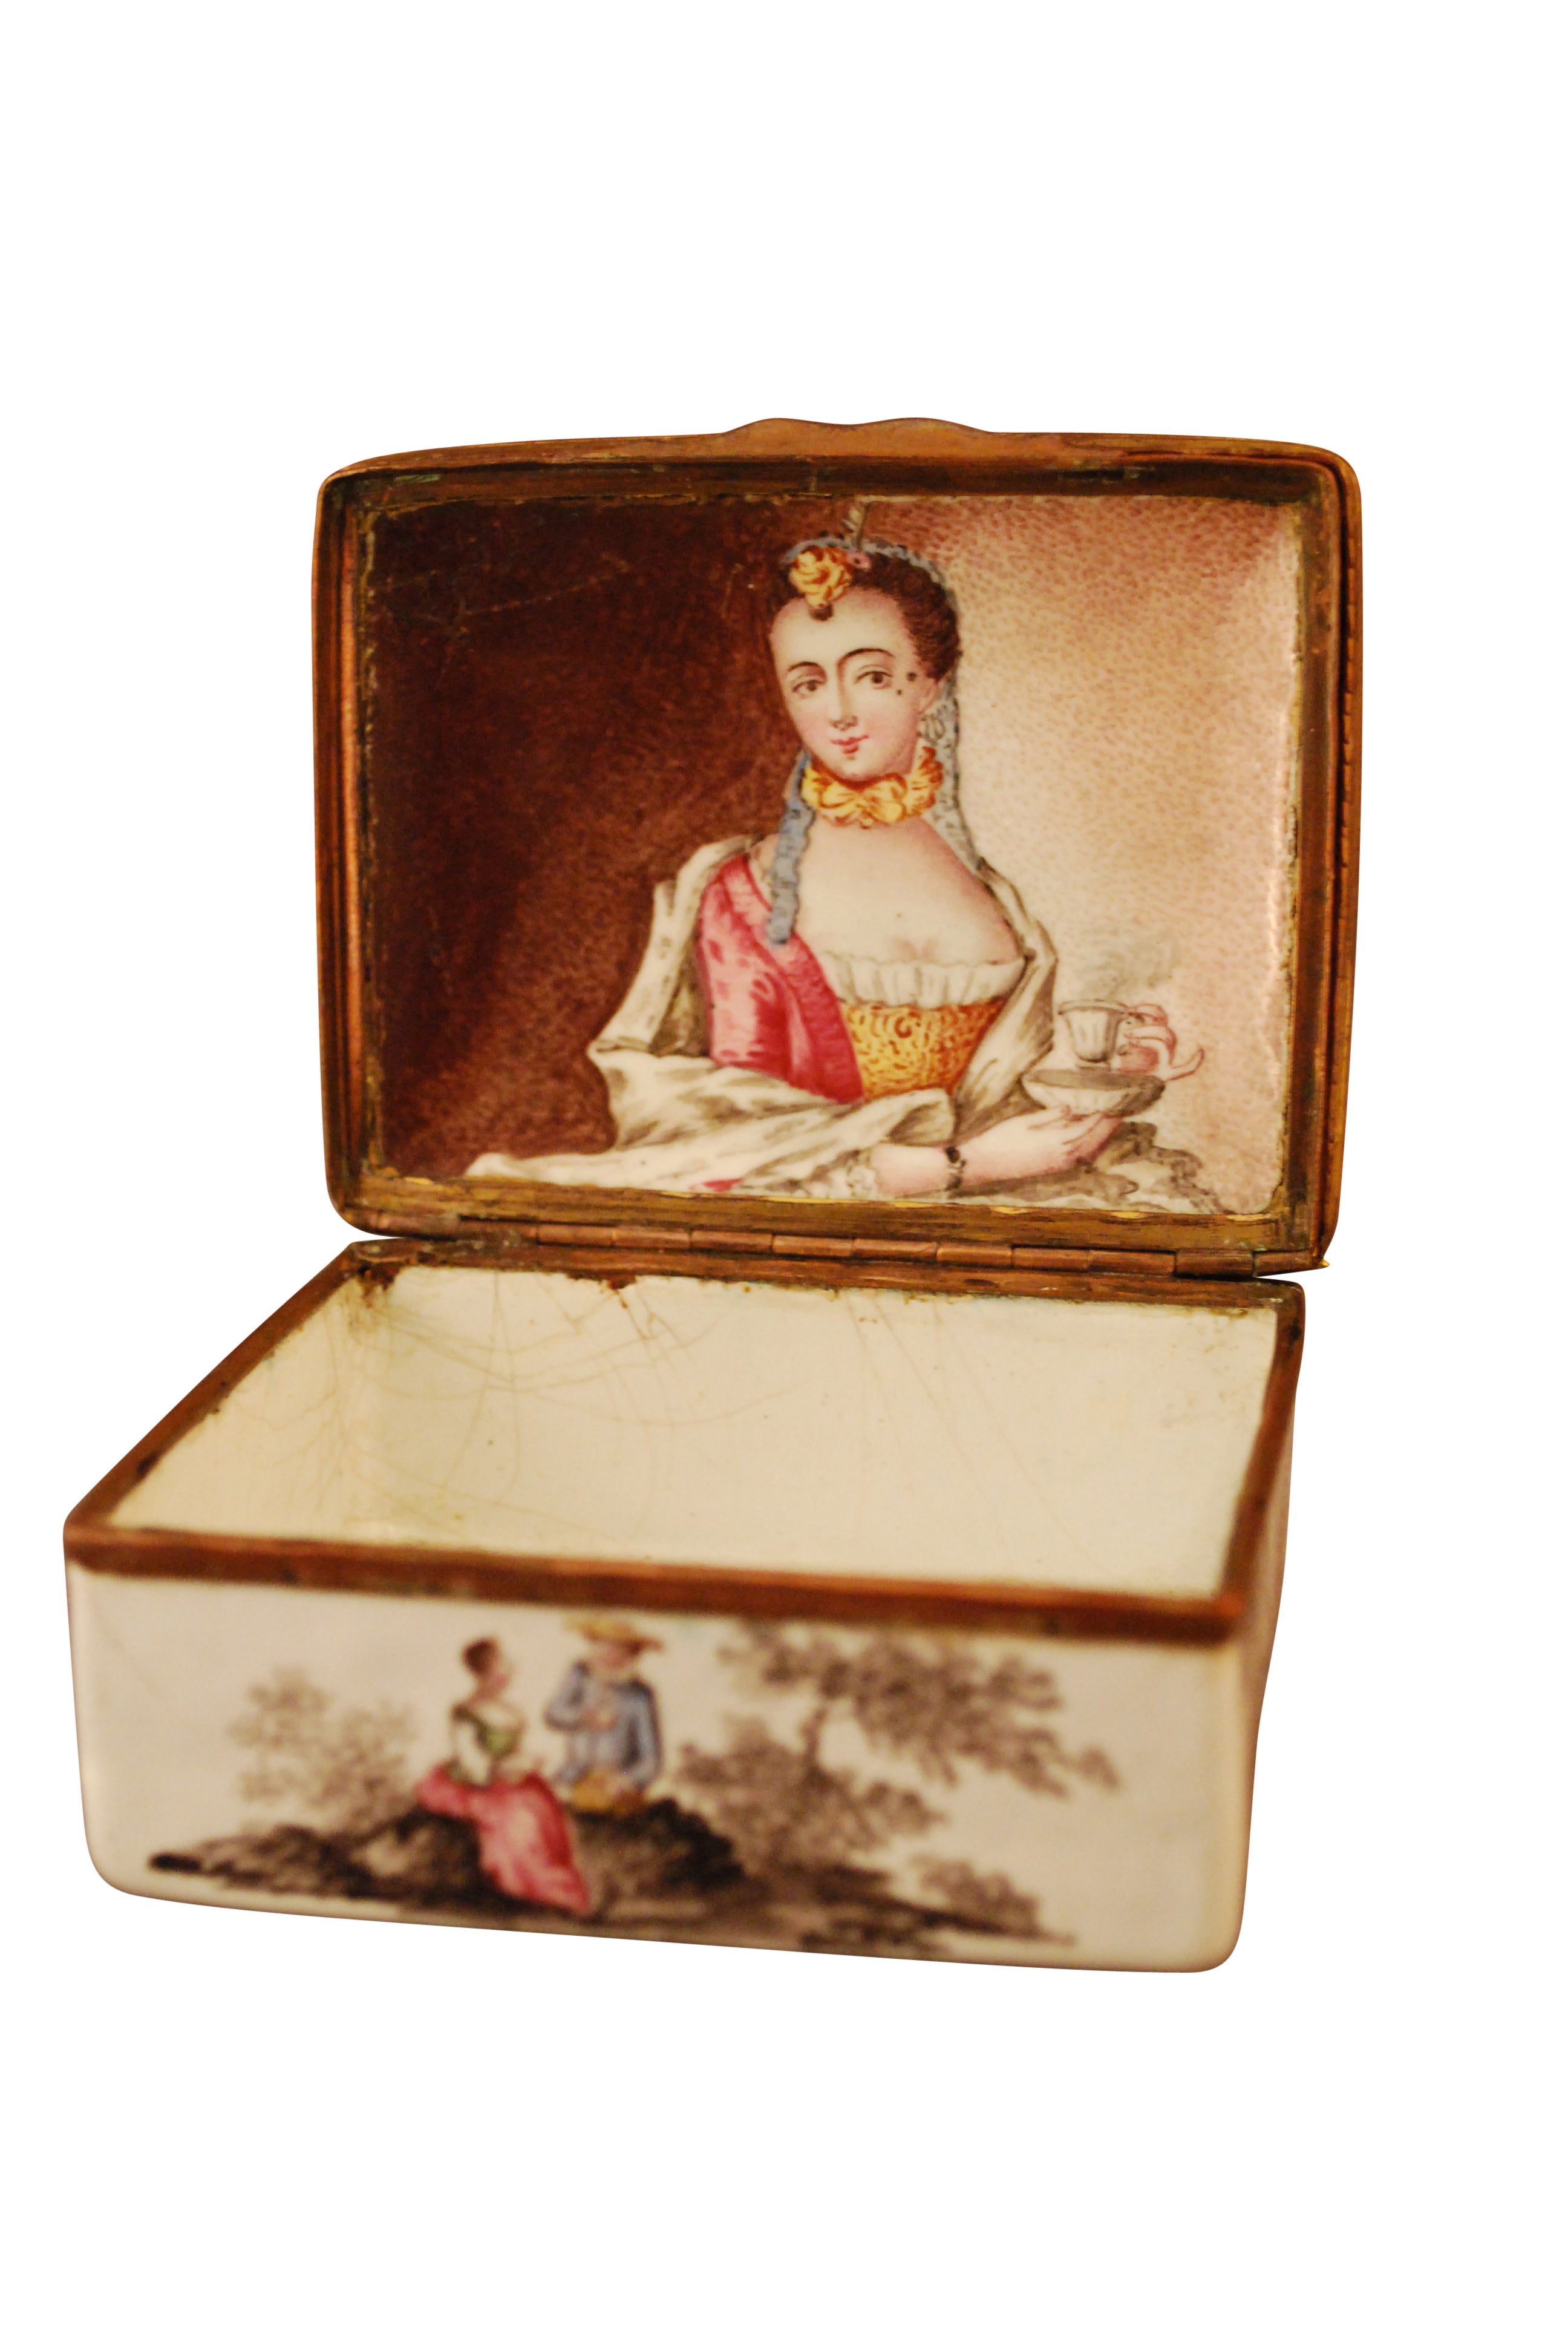 Erotic Snuff Tobacco Box with Highly Explicit Erotic Scenes Behind Secret Lid 1